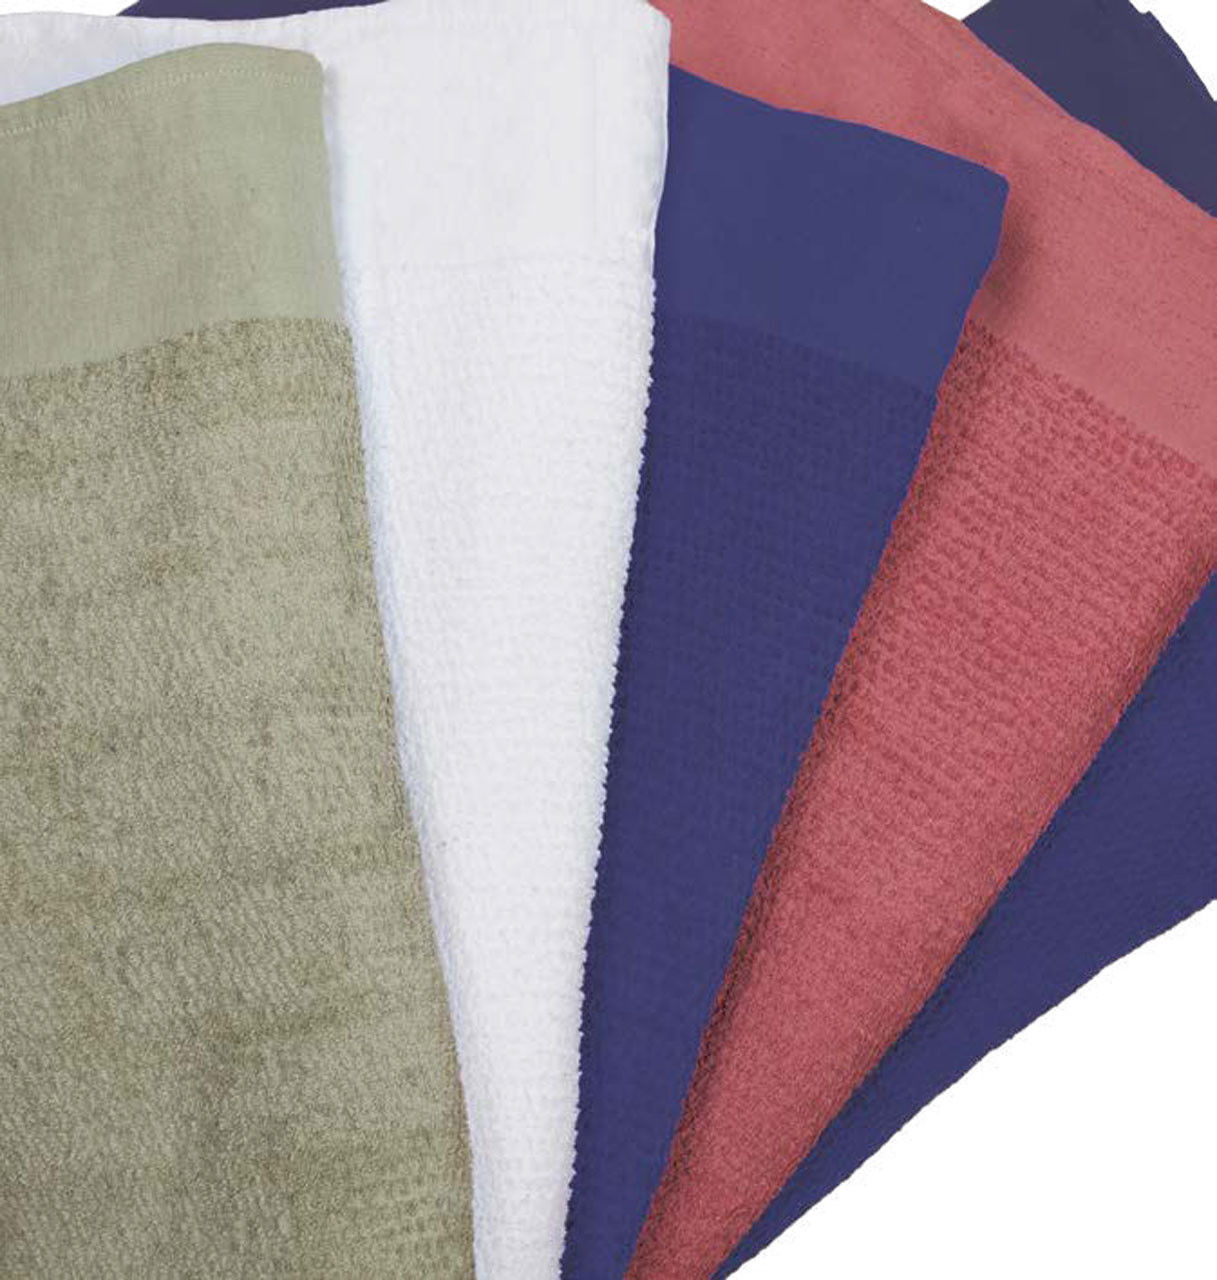 What are the latest color choices for the Terry Hospital Blankets made of terry cloth?